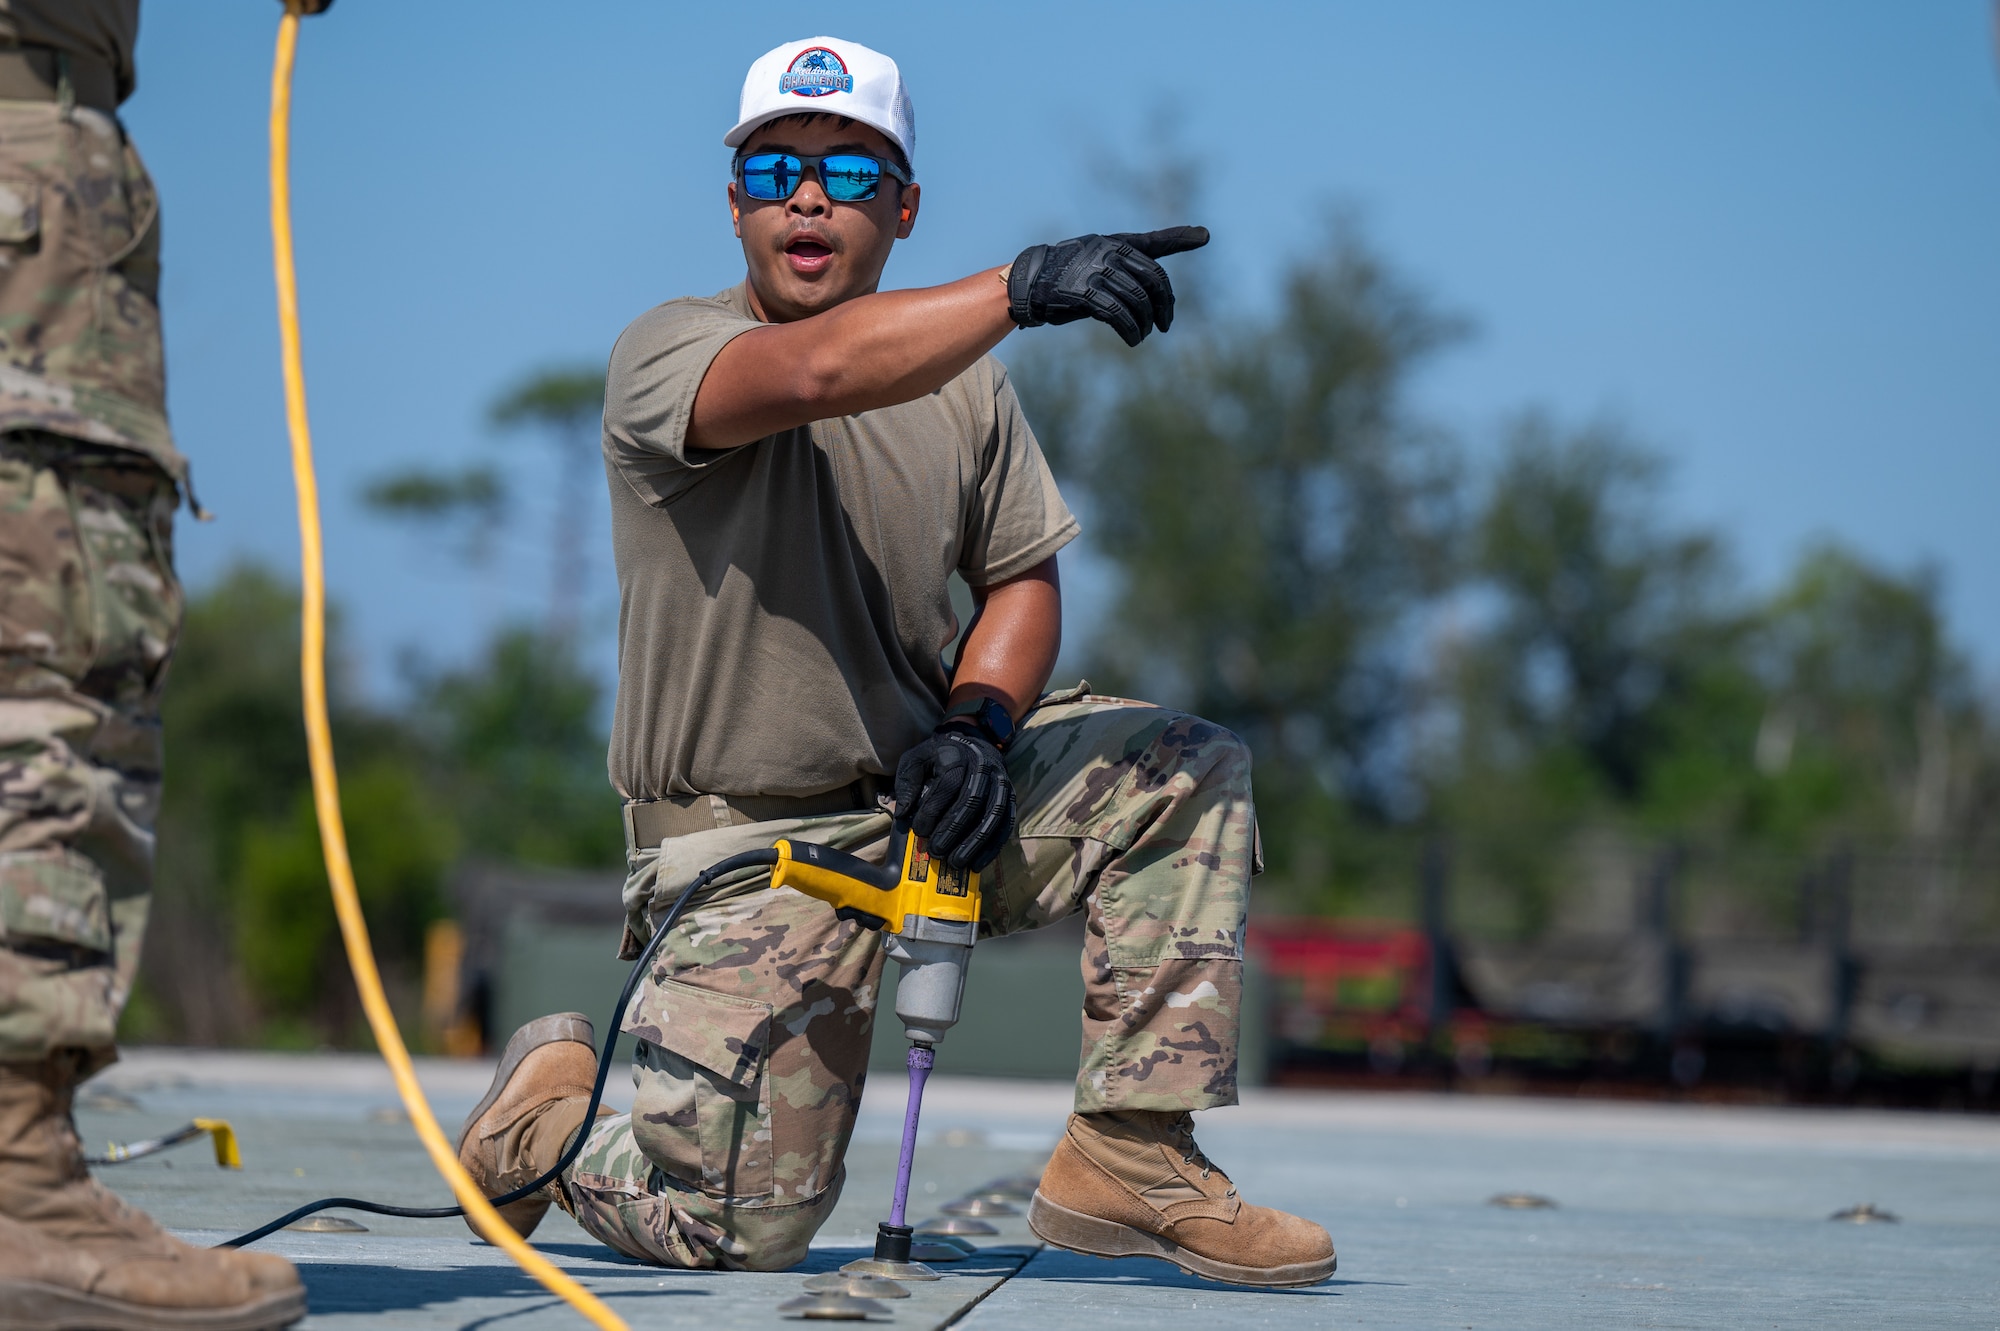 U.S. Air Force Airman 1st Class Rommel Angeles, 45th Civil Engineer Squadron heavy equipment operator, gives instruction to a teammate during a fiber reinforced polymer matting installation event at Readiness Challenge X at Tyndall Air Force Base, Florida, April 25, 2024. Readiness Challenge X was a multi-day competition between teams of civil engineering squadrons from around the world that tested unit readiness, strengthened camaraderie and sharpened skills through joint training in a simulated contested environment. (U.S. Space Force photo by Airman 1st Class Spencer Contreras)